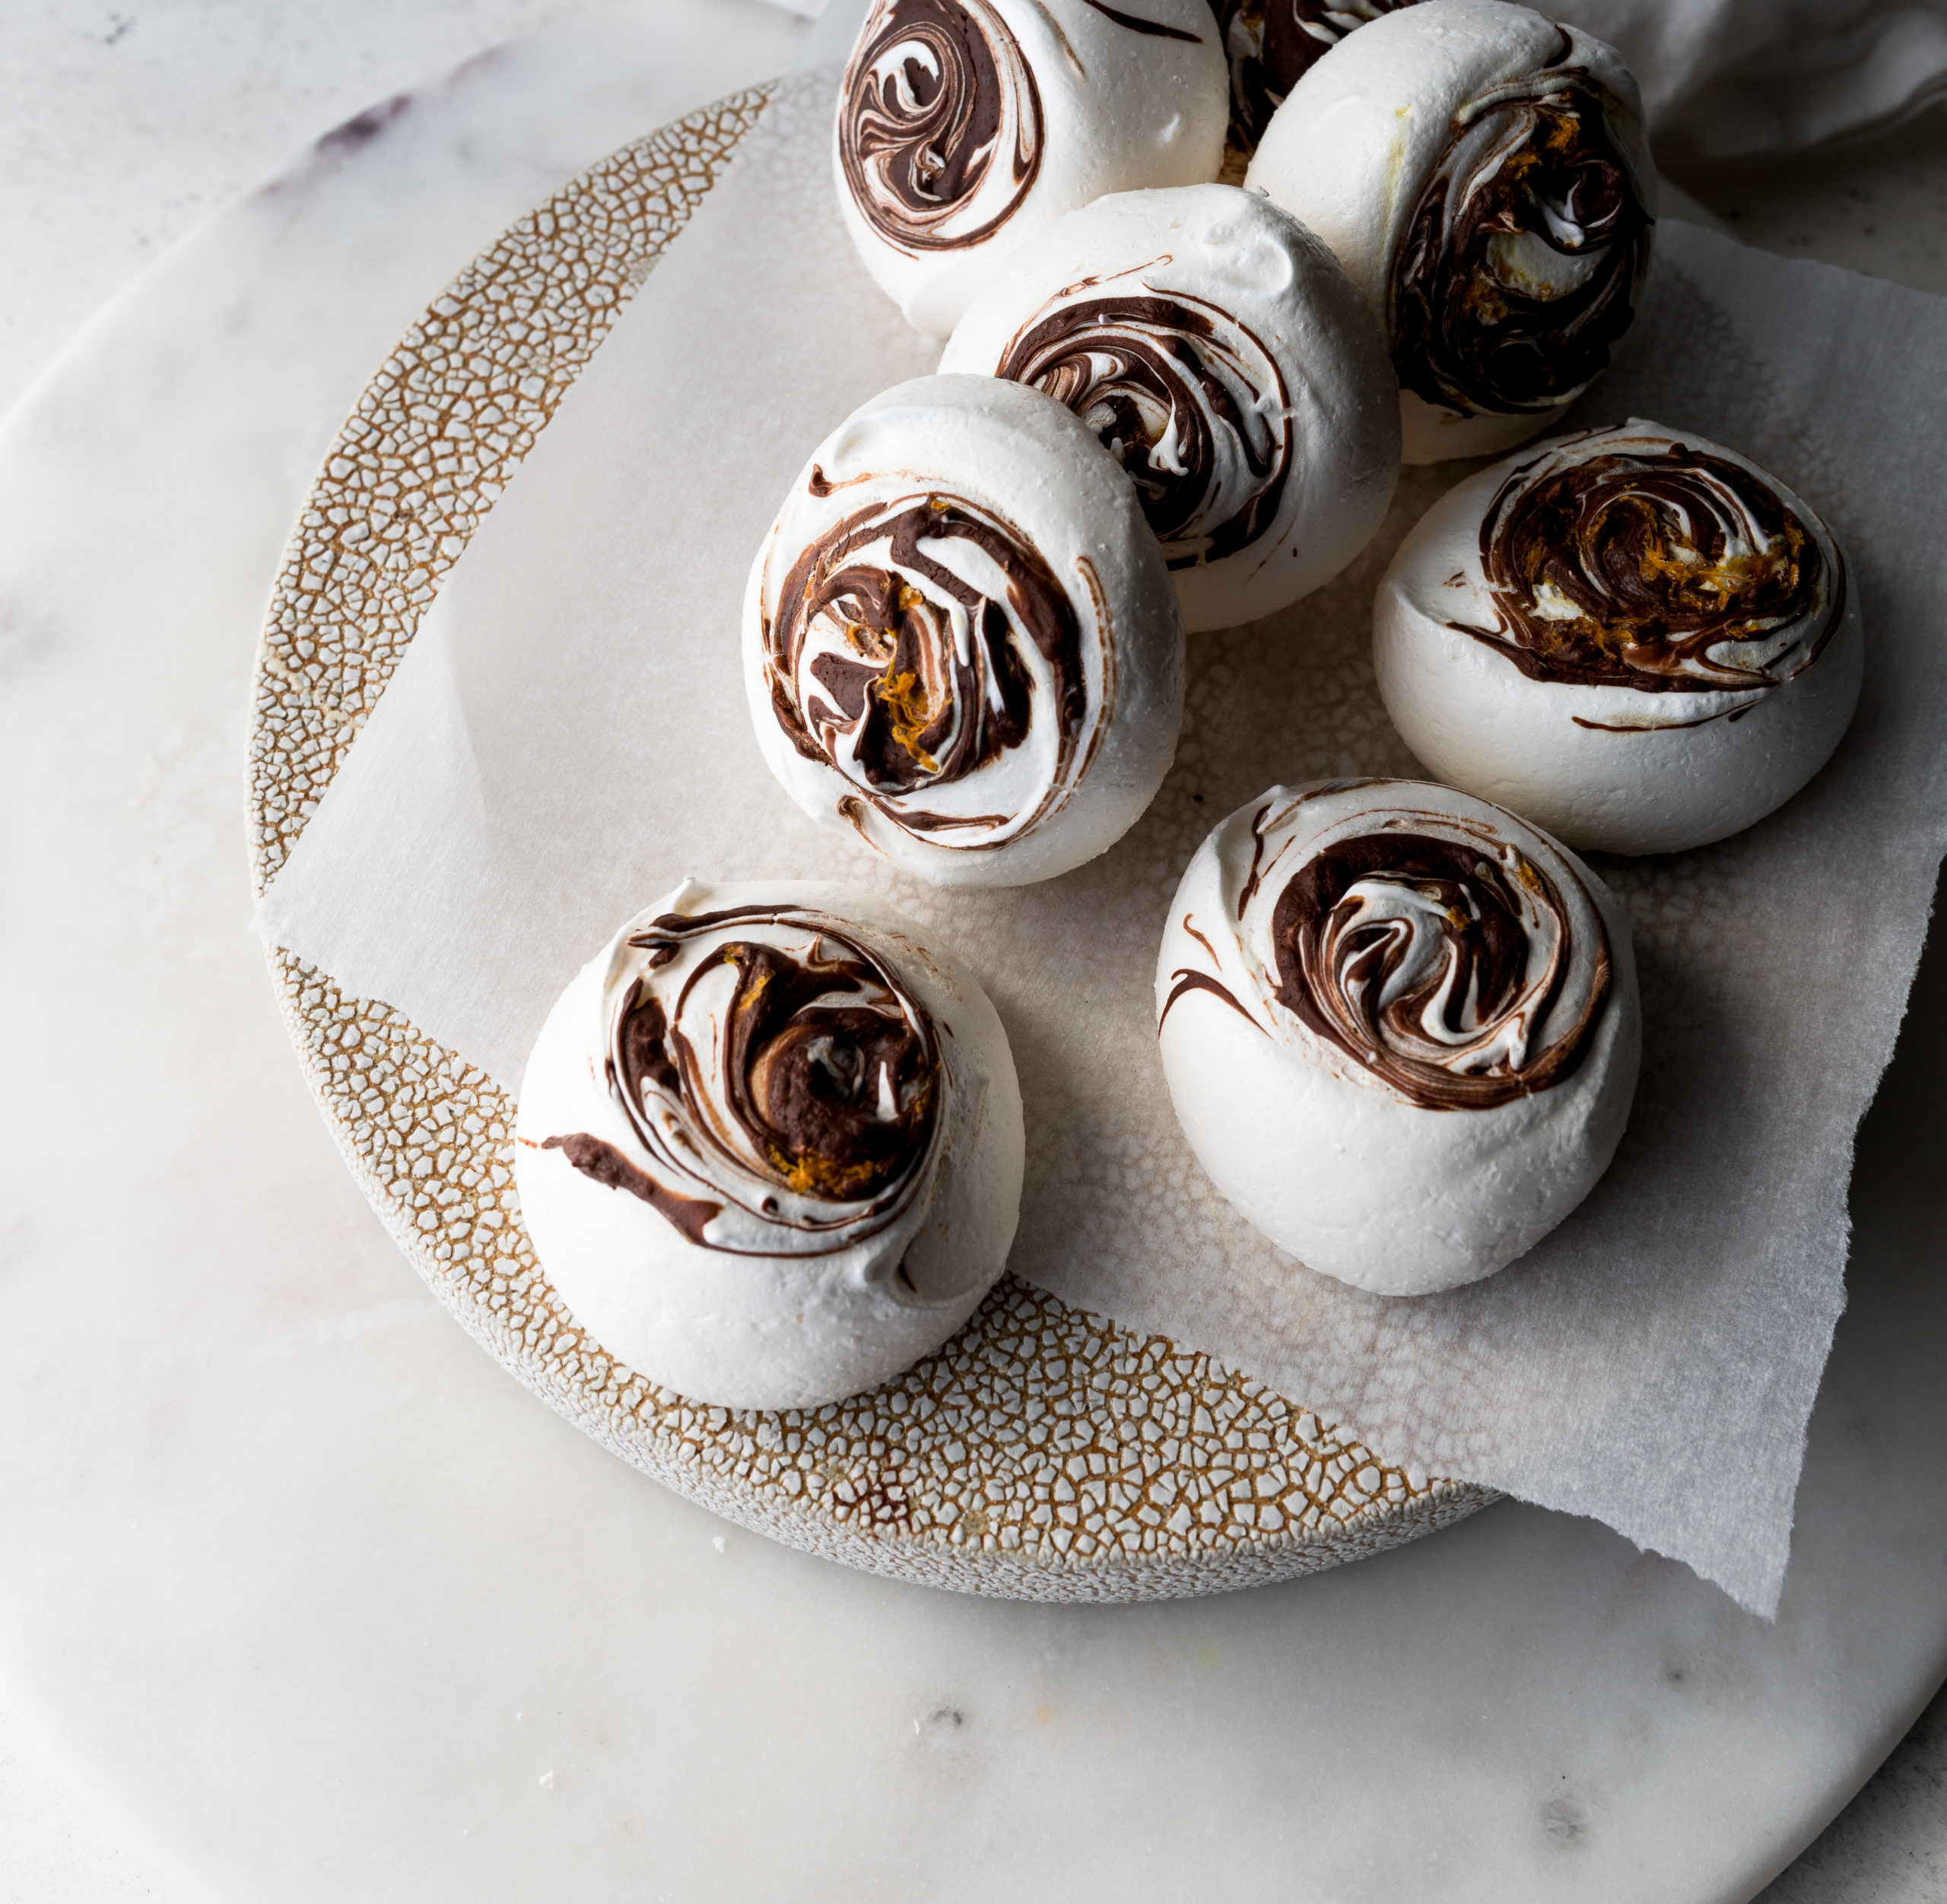 Chocolate Orange Meringues on a parchment lined platter on top of a marble surface.